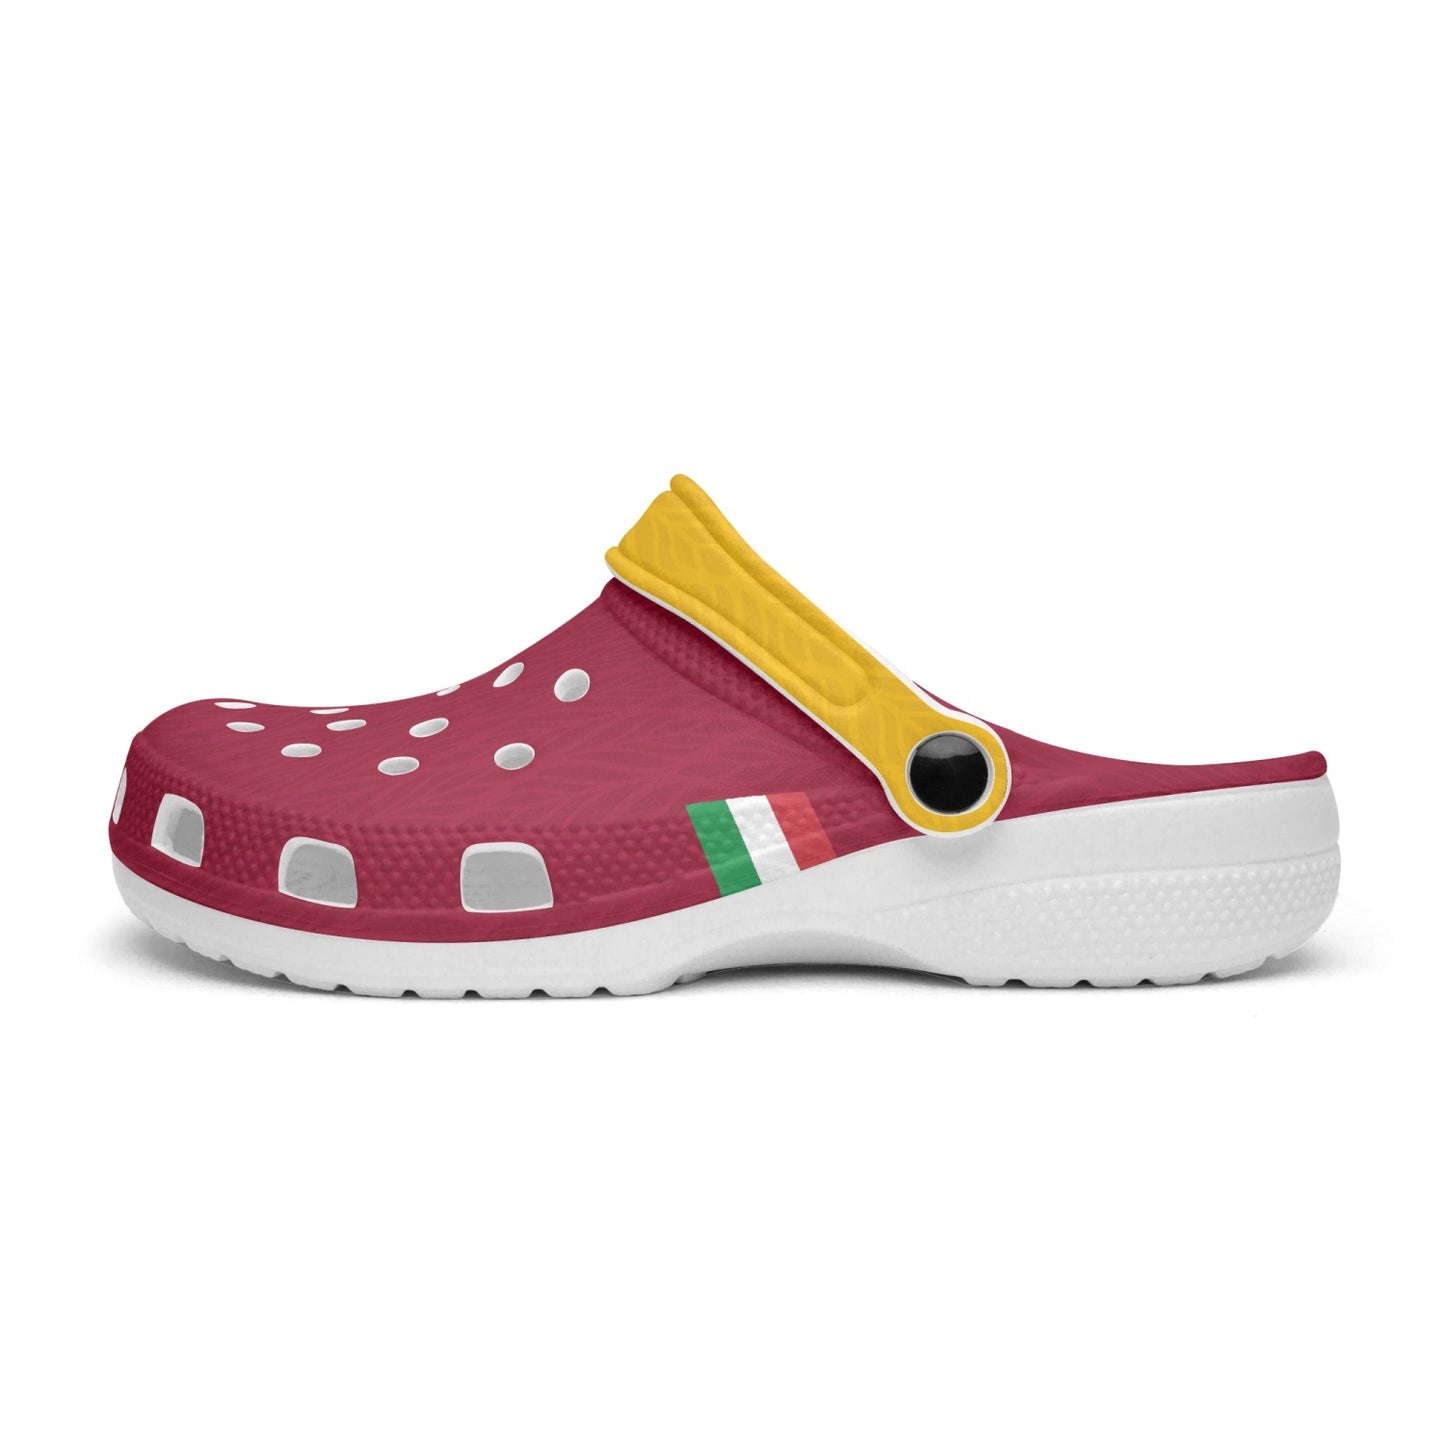 Roma Clogs shoes